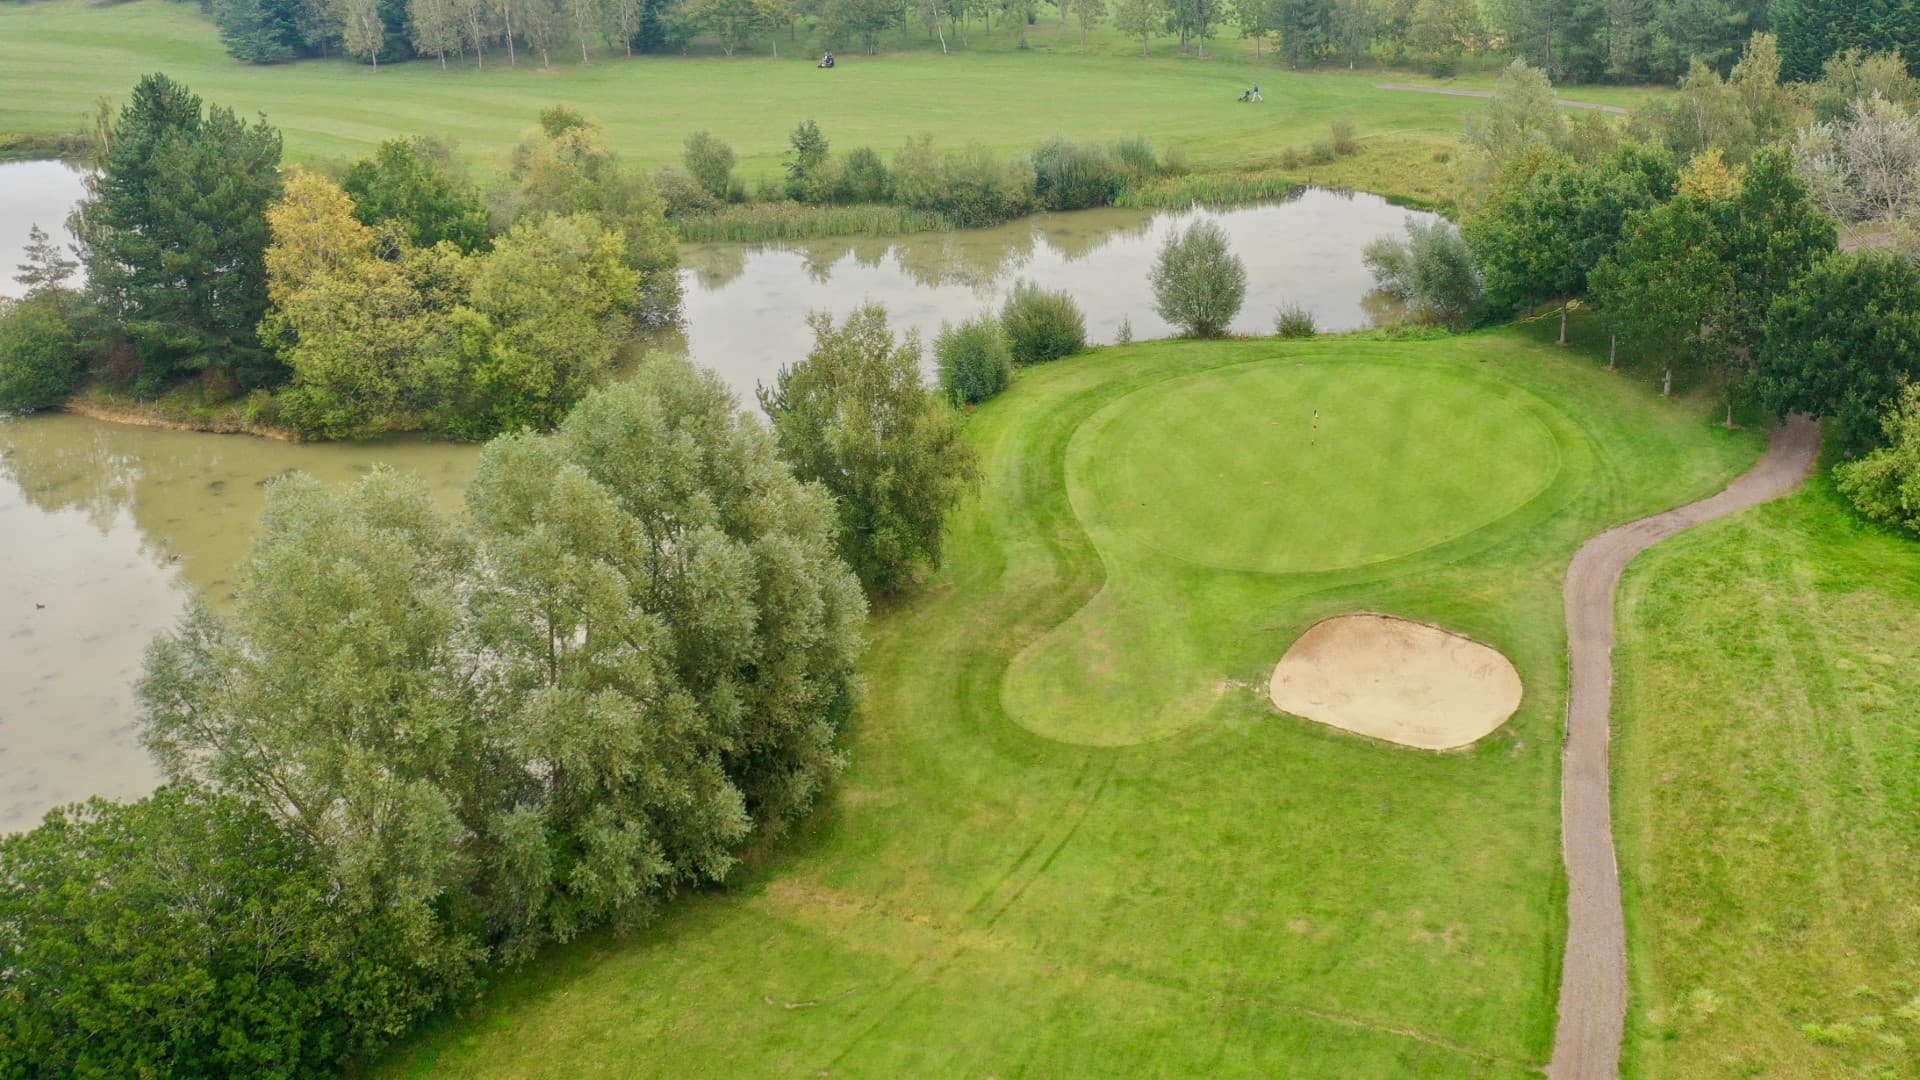 Aerial view of The Essex golf course and water feature